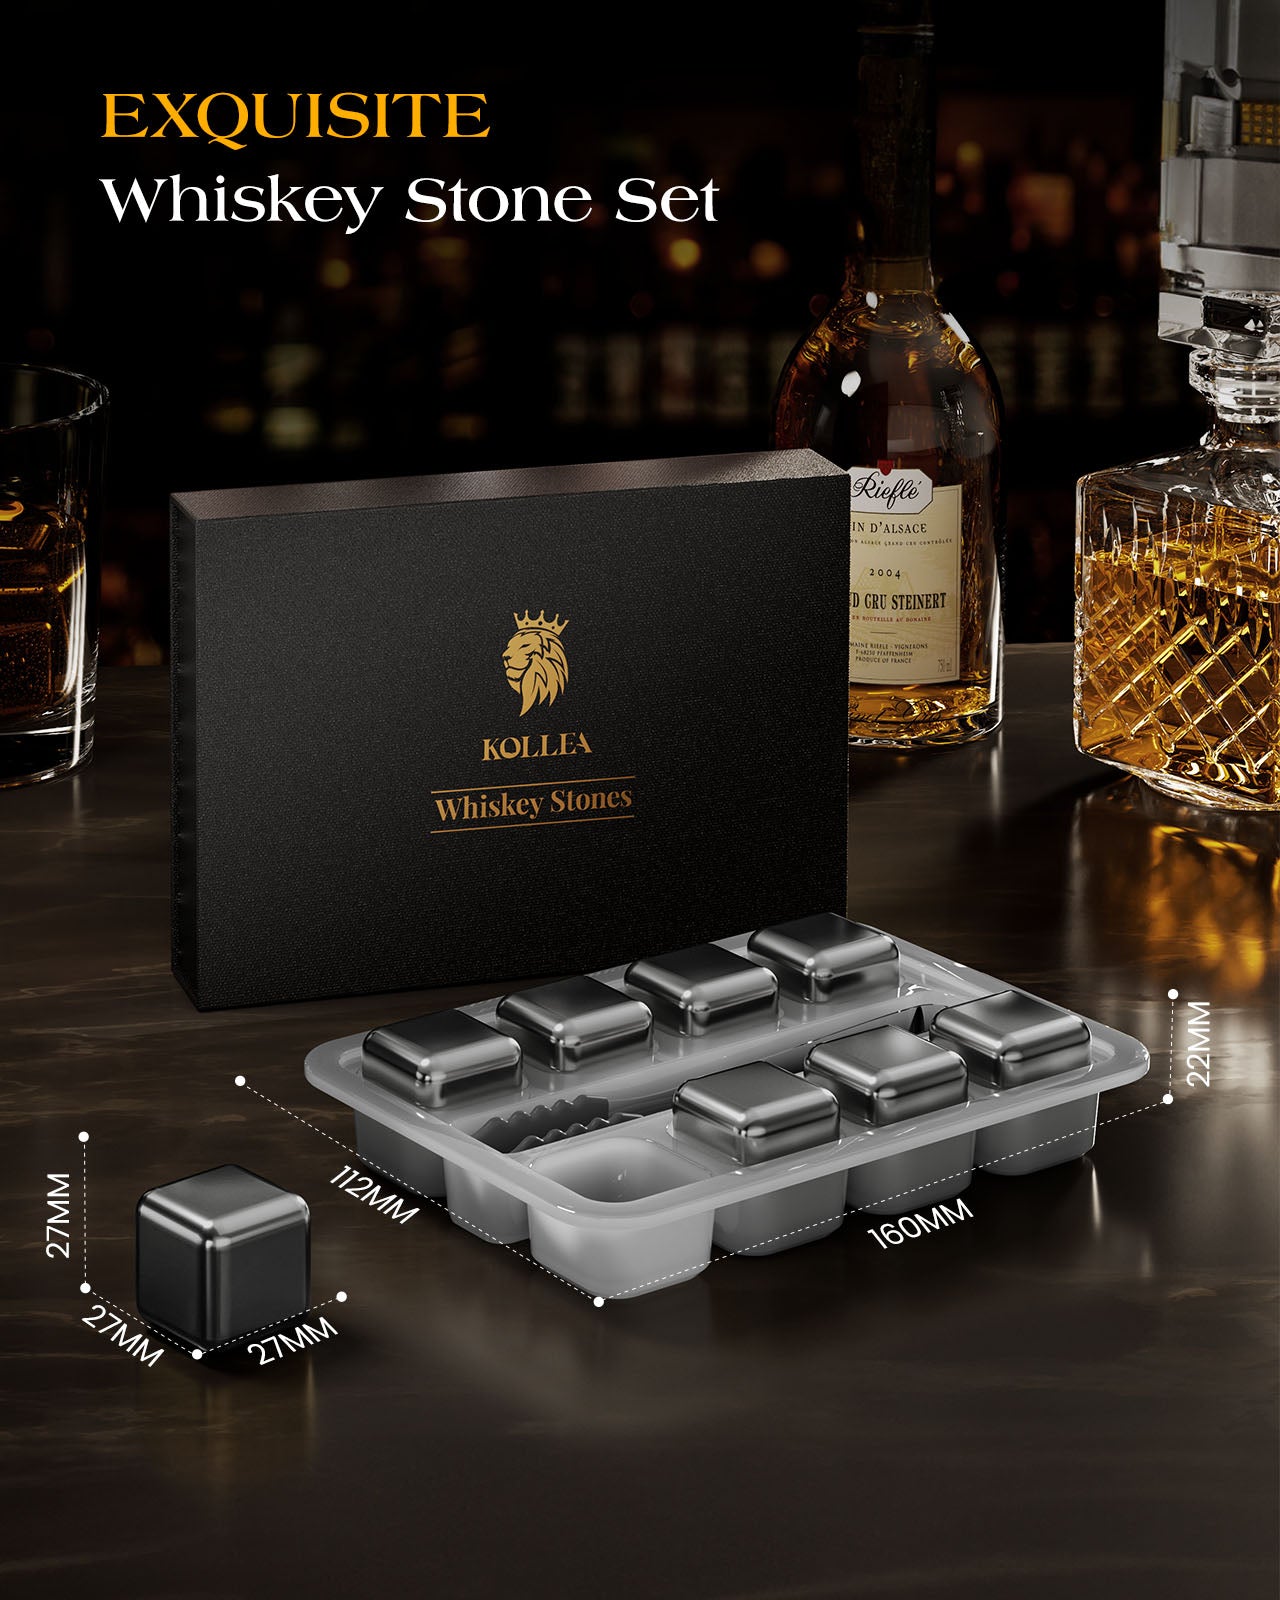 Kollea 8 Pack Sliver Stainless Steel Whiskey Stones, Gifts for Whiskey Drinkers